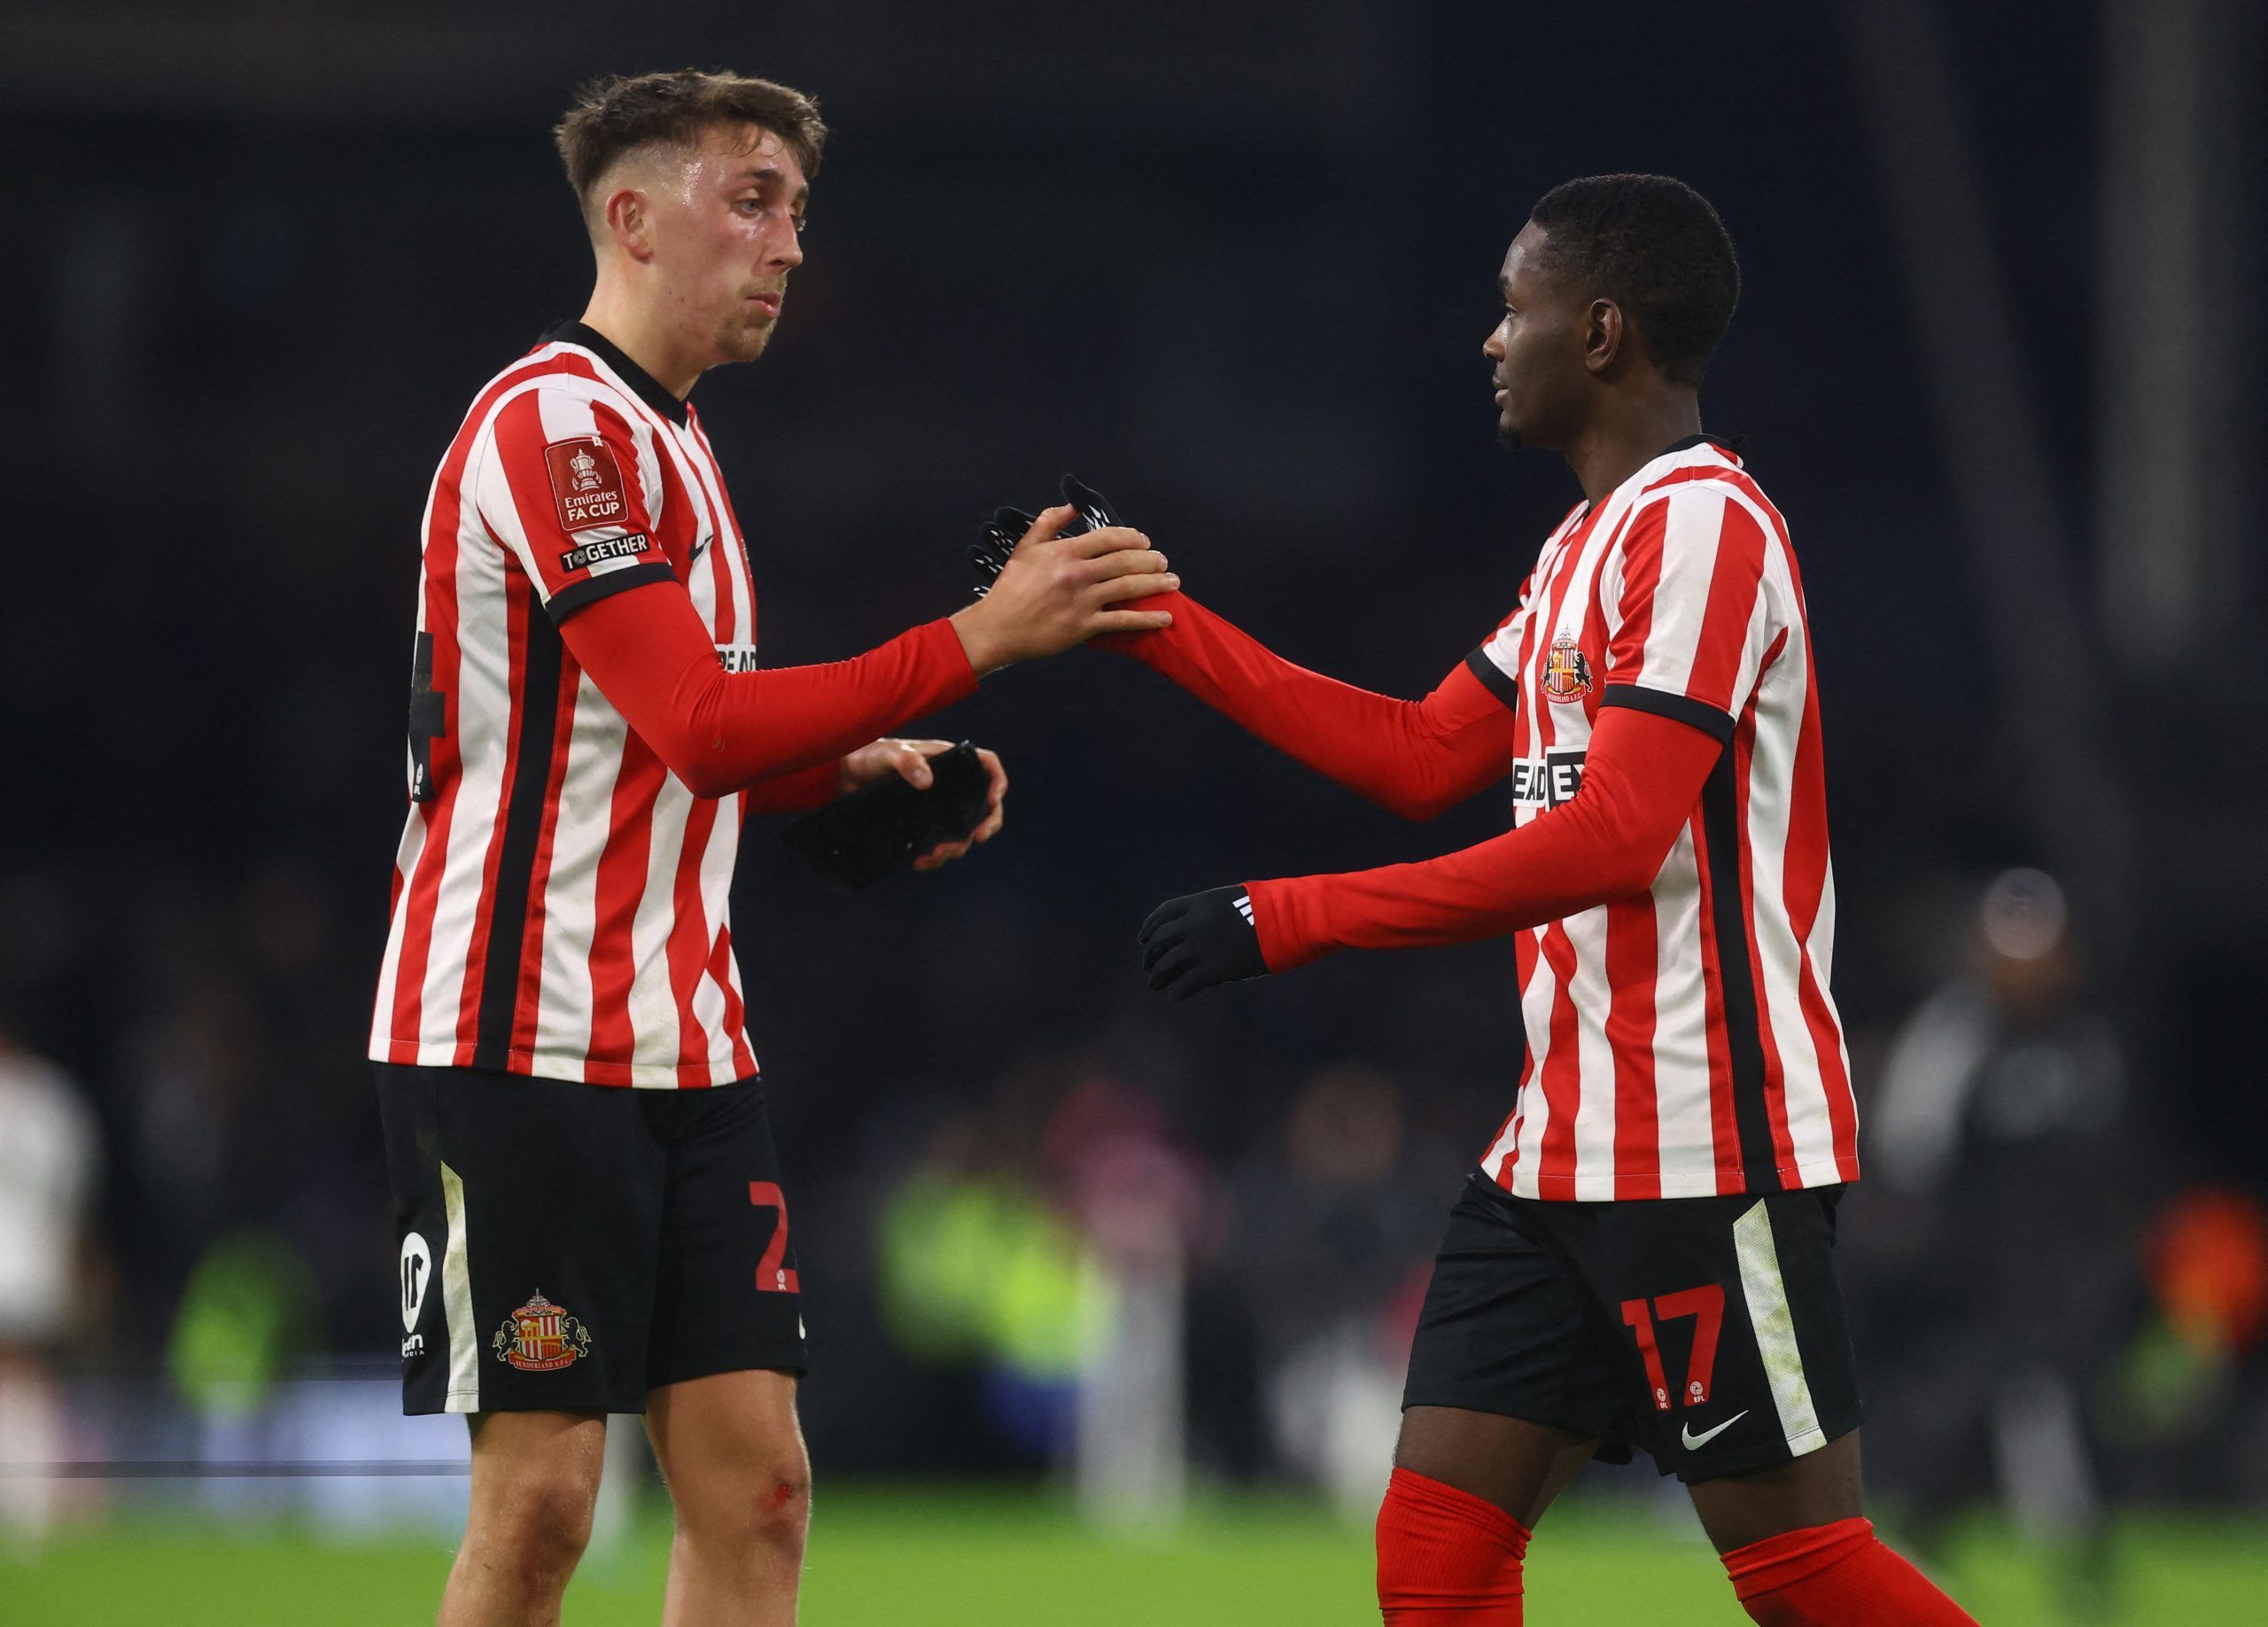 Soccer Football - FA Cup - Fourth Round - Fulham v Sunderland - Craven Cottage, London, Britain - January 28, 2023 Sunderland's Daniel Neil shakes hands with Abdullah Ba after the match Action Images via Reuters/Paul Childs